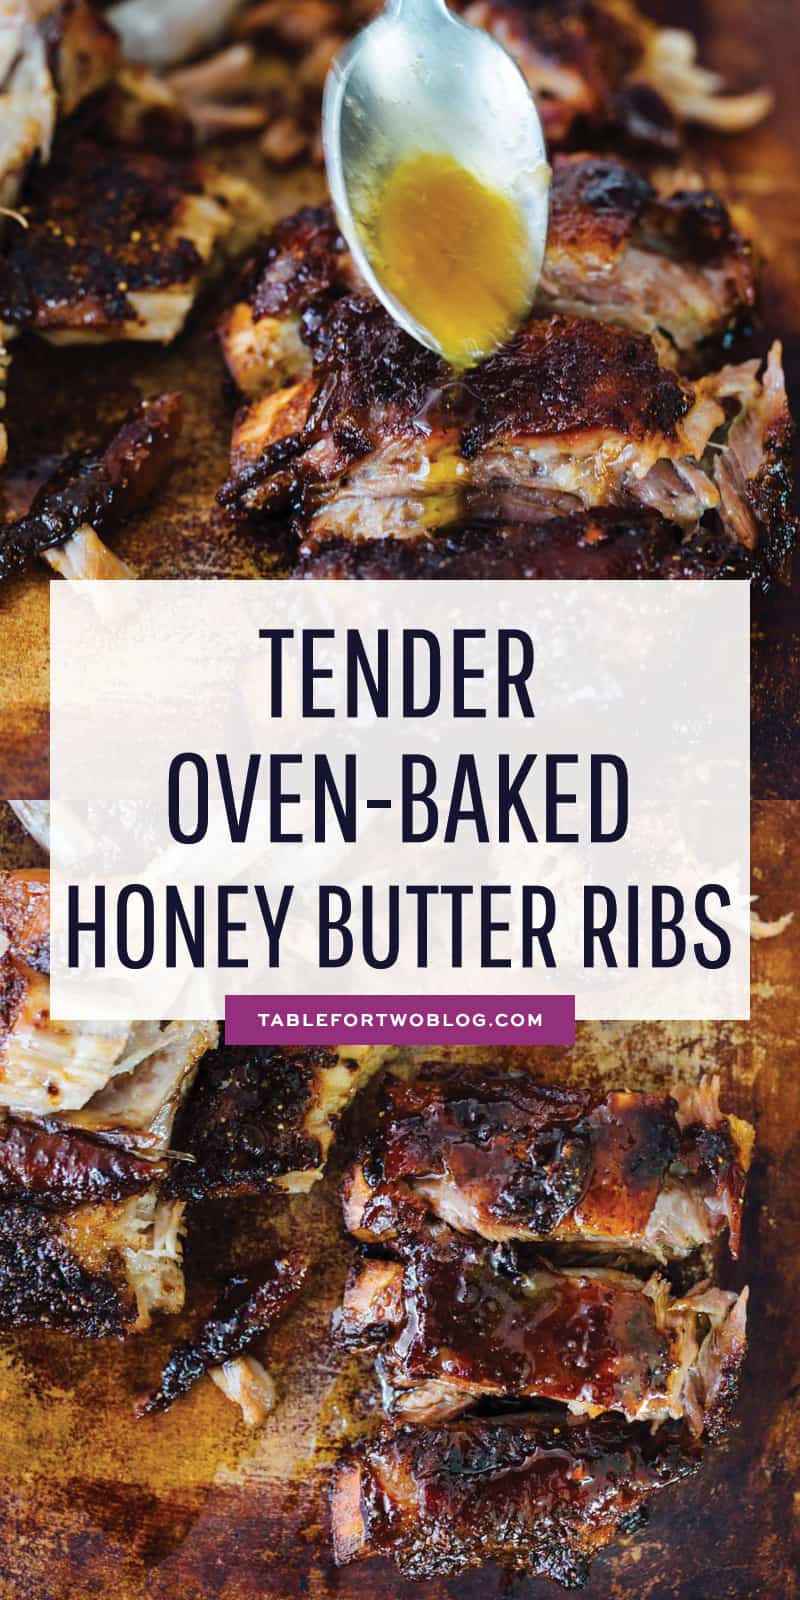 These tender honey butter ribs are oven baked to perfection and they fall off the bone! They are literally bathed in honey, butter, and brown sugar. There is no way you will be able to put this down! #honey #butter #ribs #babybackribs #ovenbaked #pork #porkrecipe